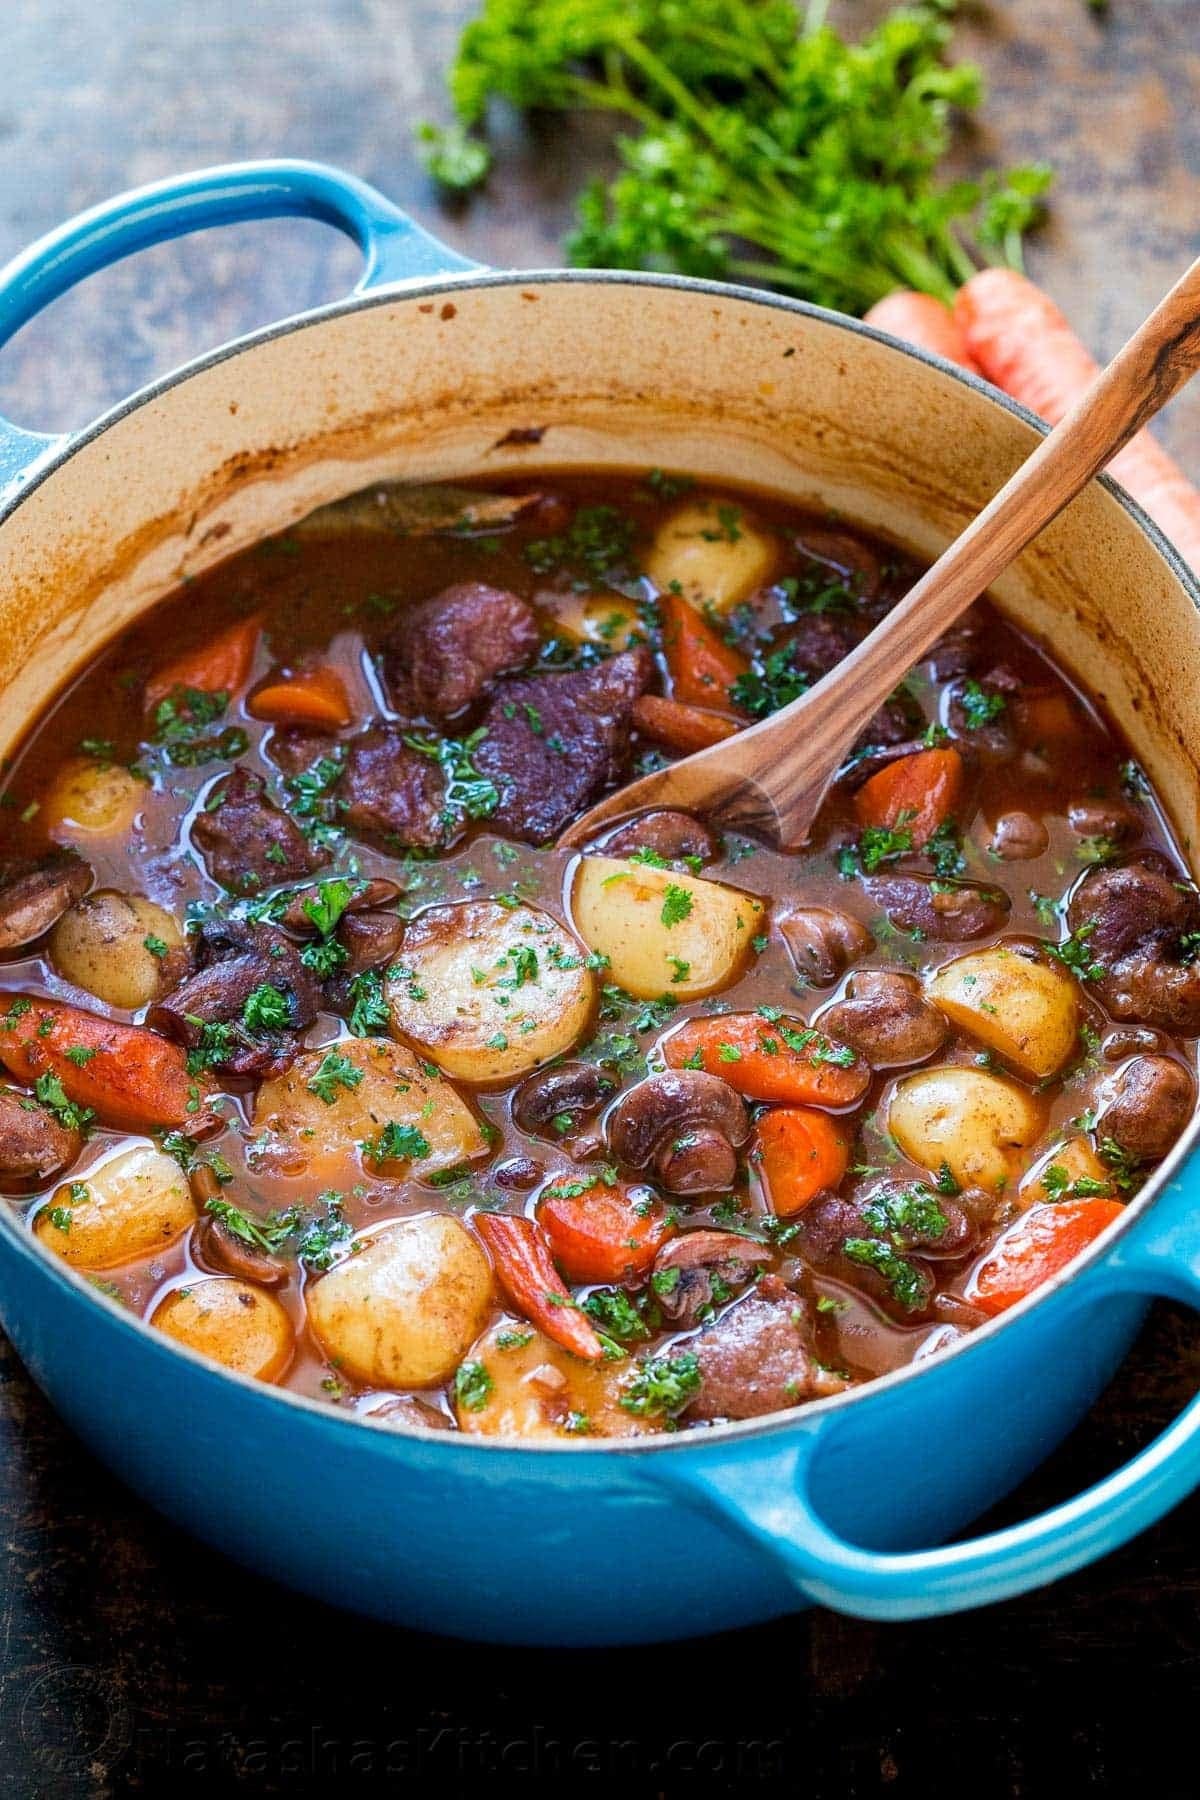 Lamb stew with potatoes, carrots and mushroom in a blue pot.